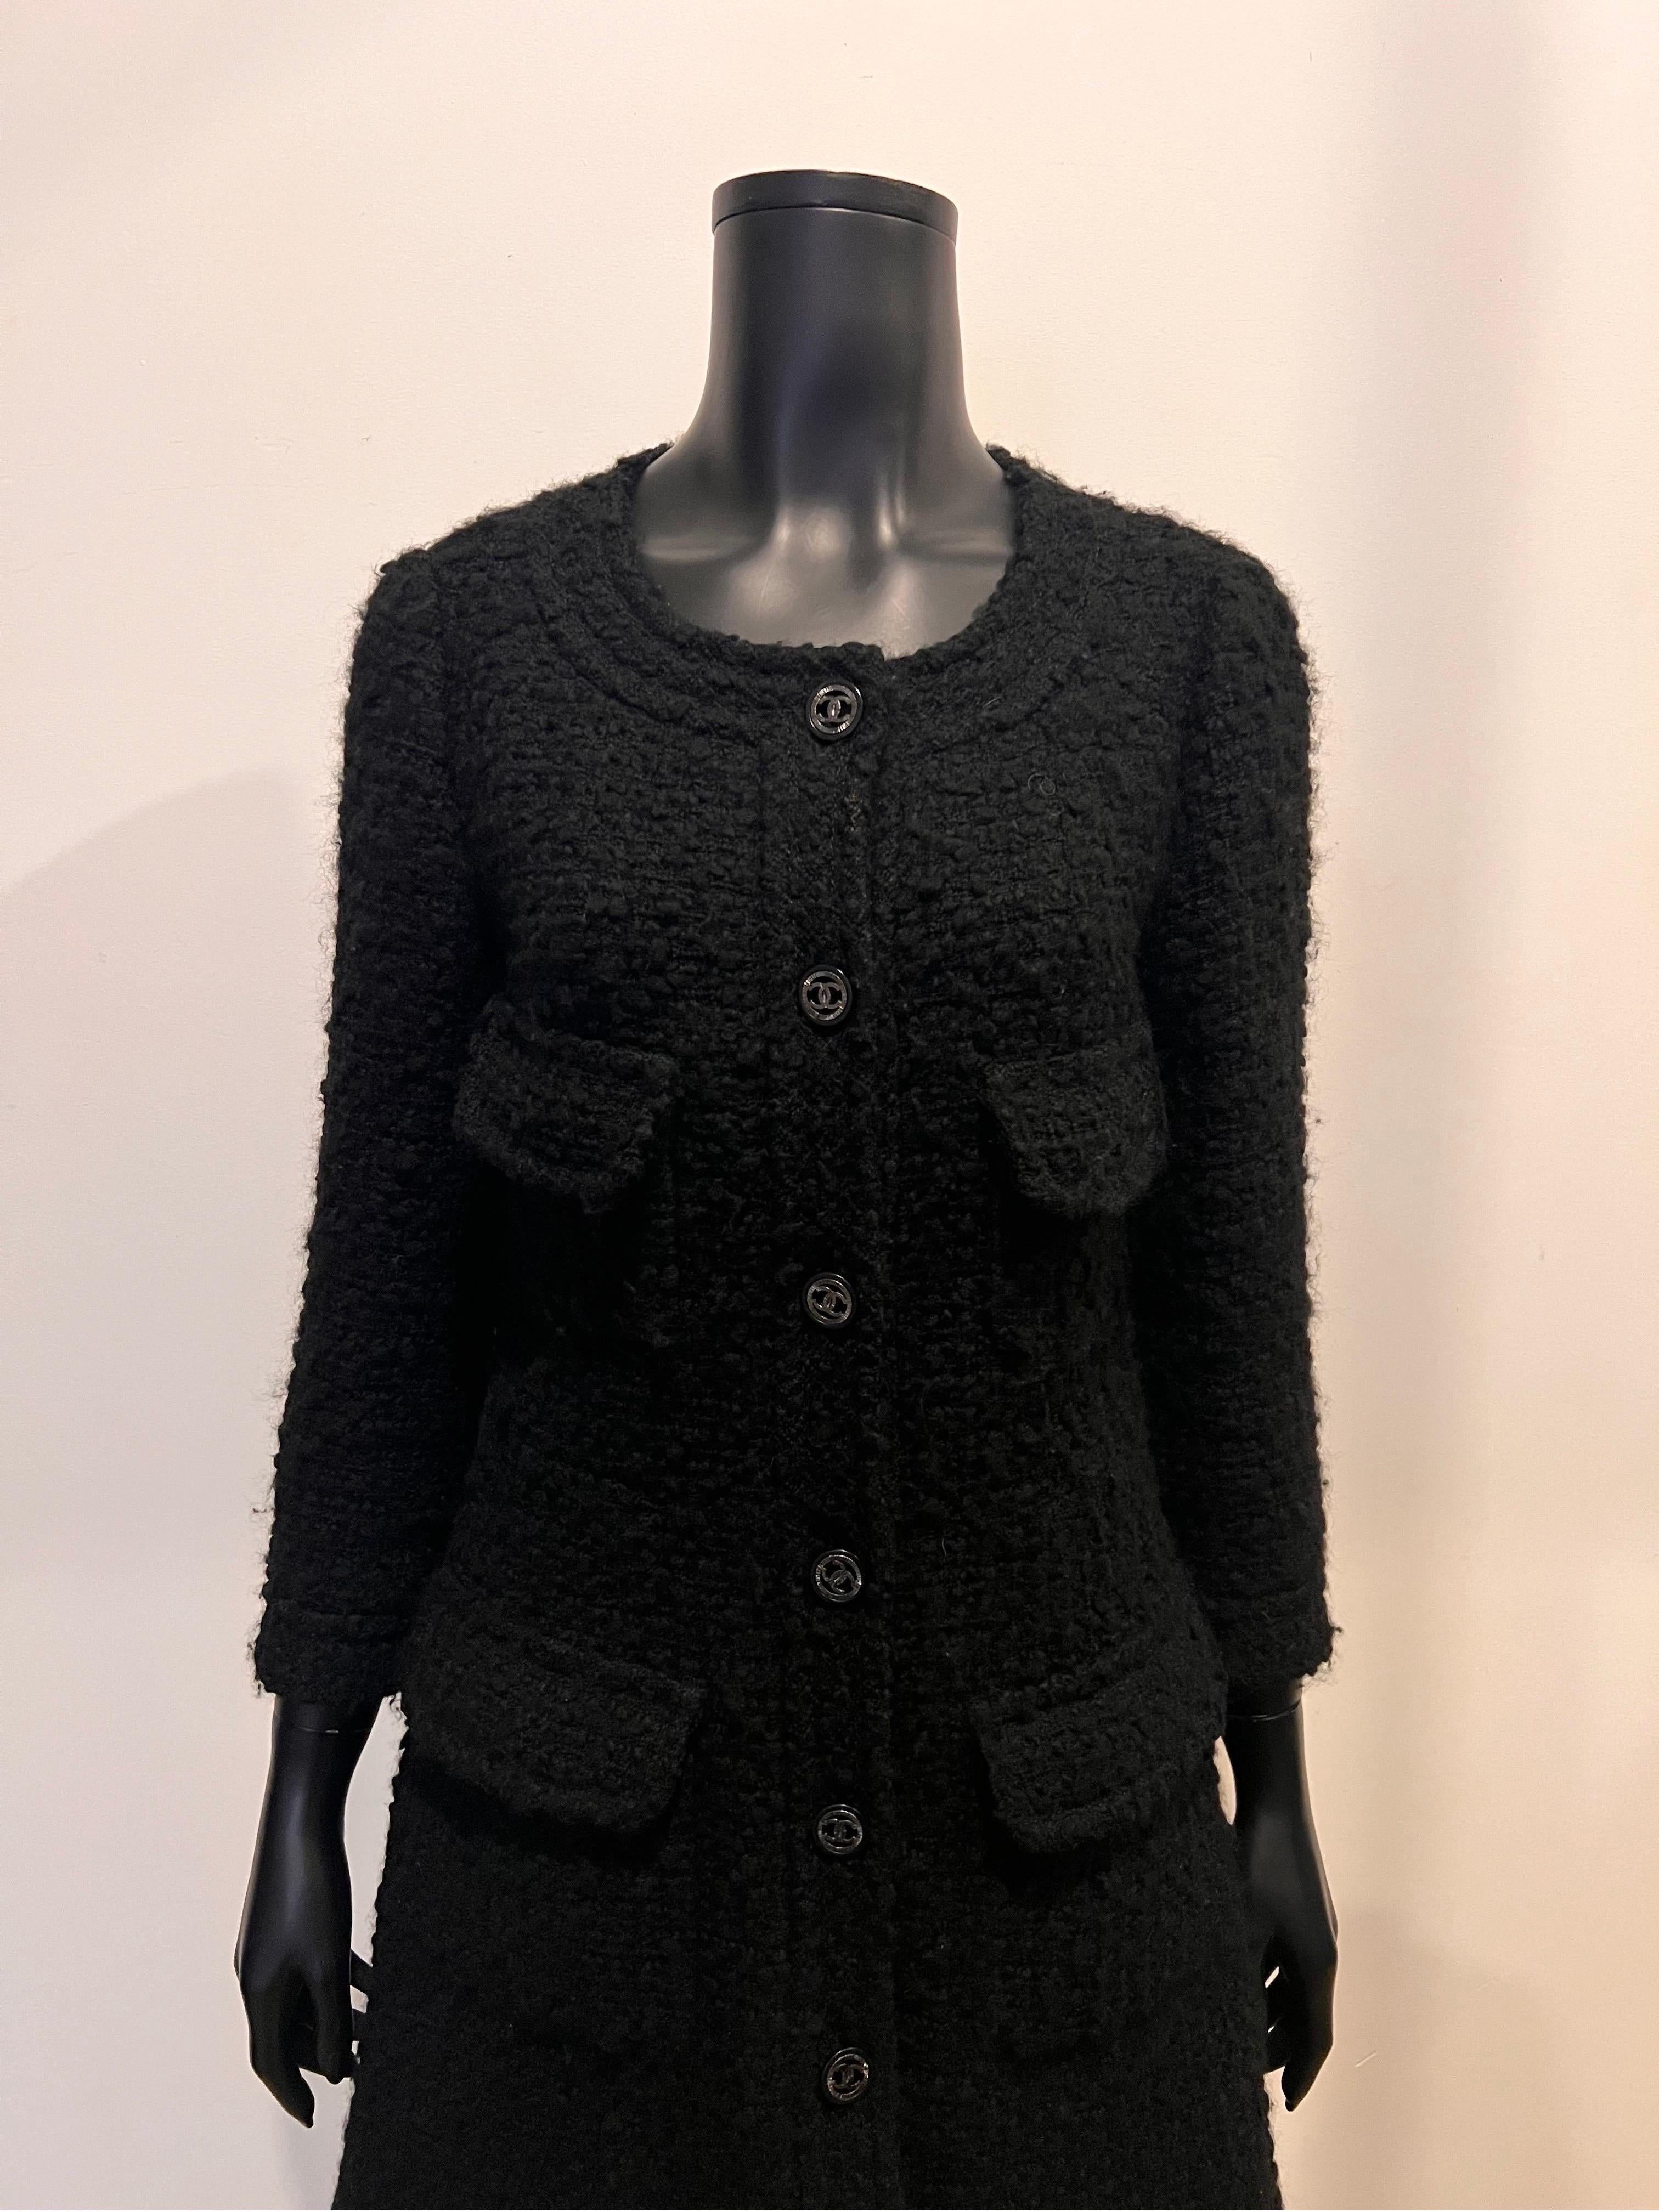 Chanel 2013 boucle tweed coat dress in black with CC details buttons  8